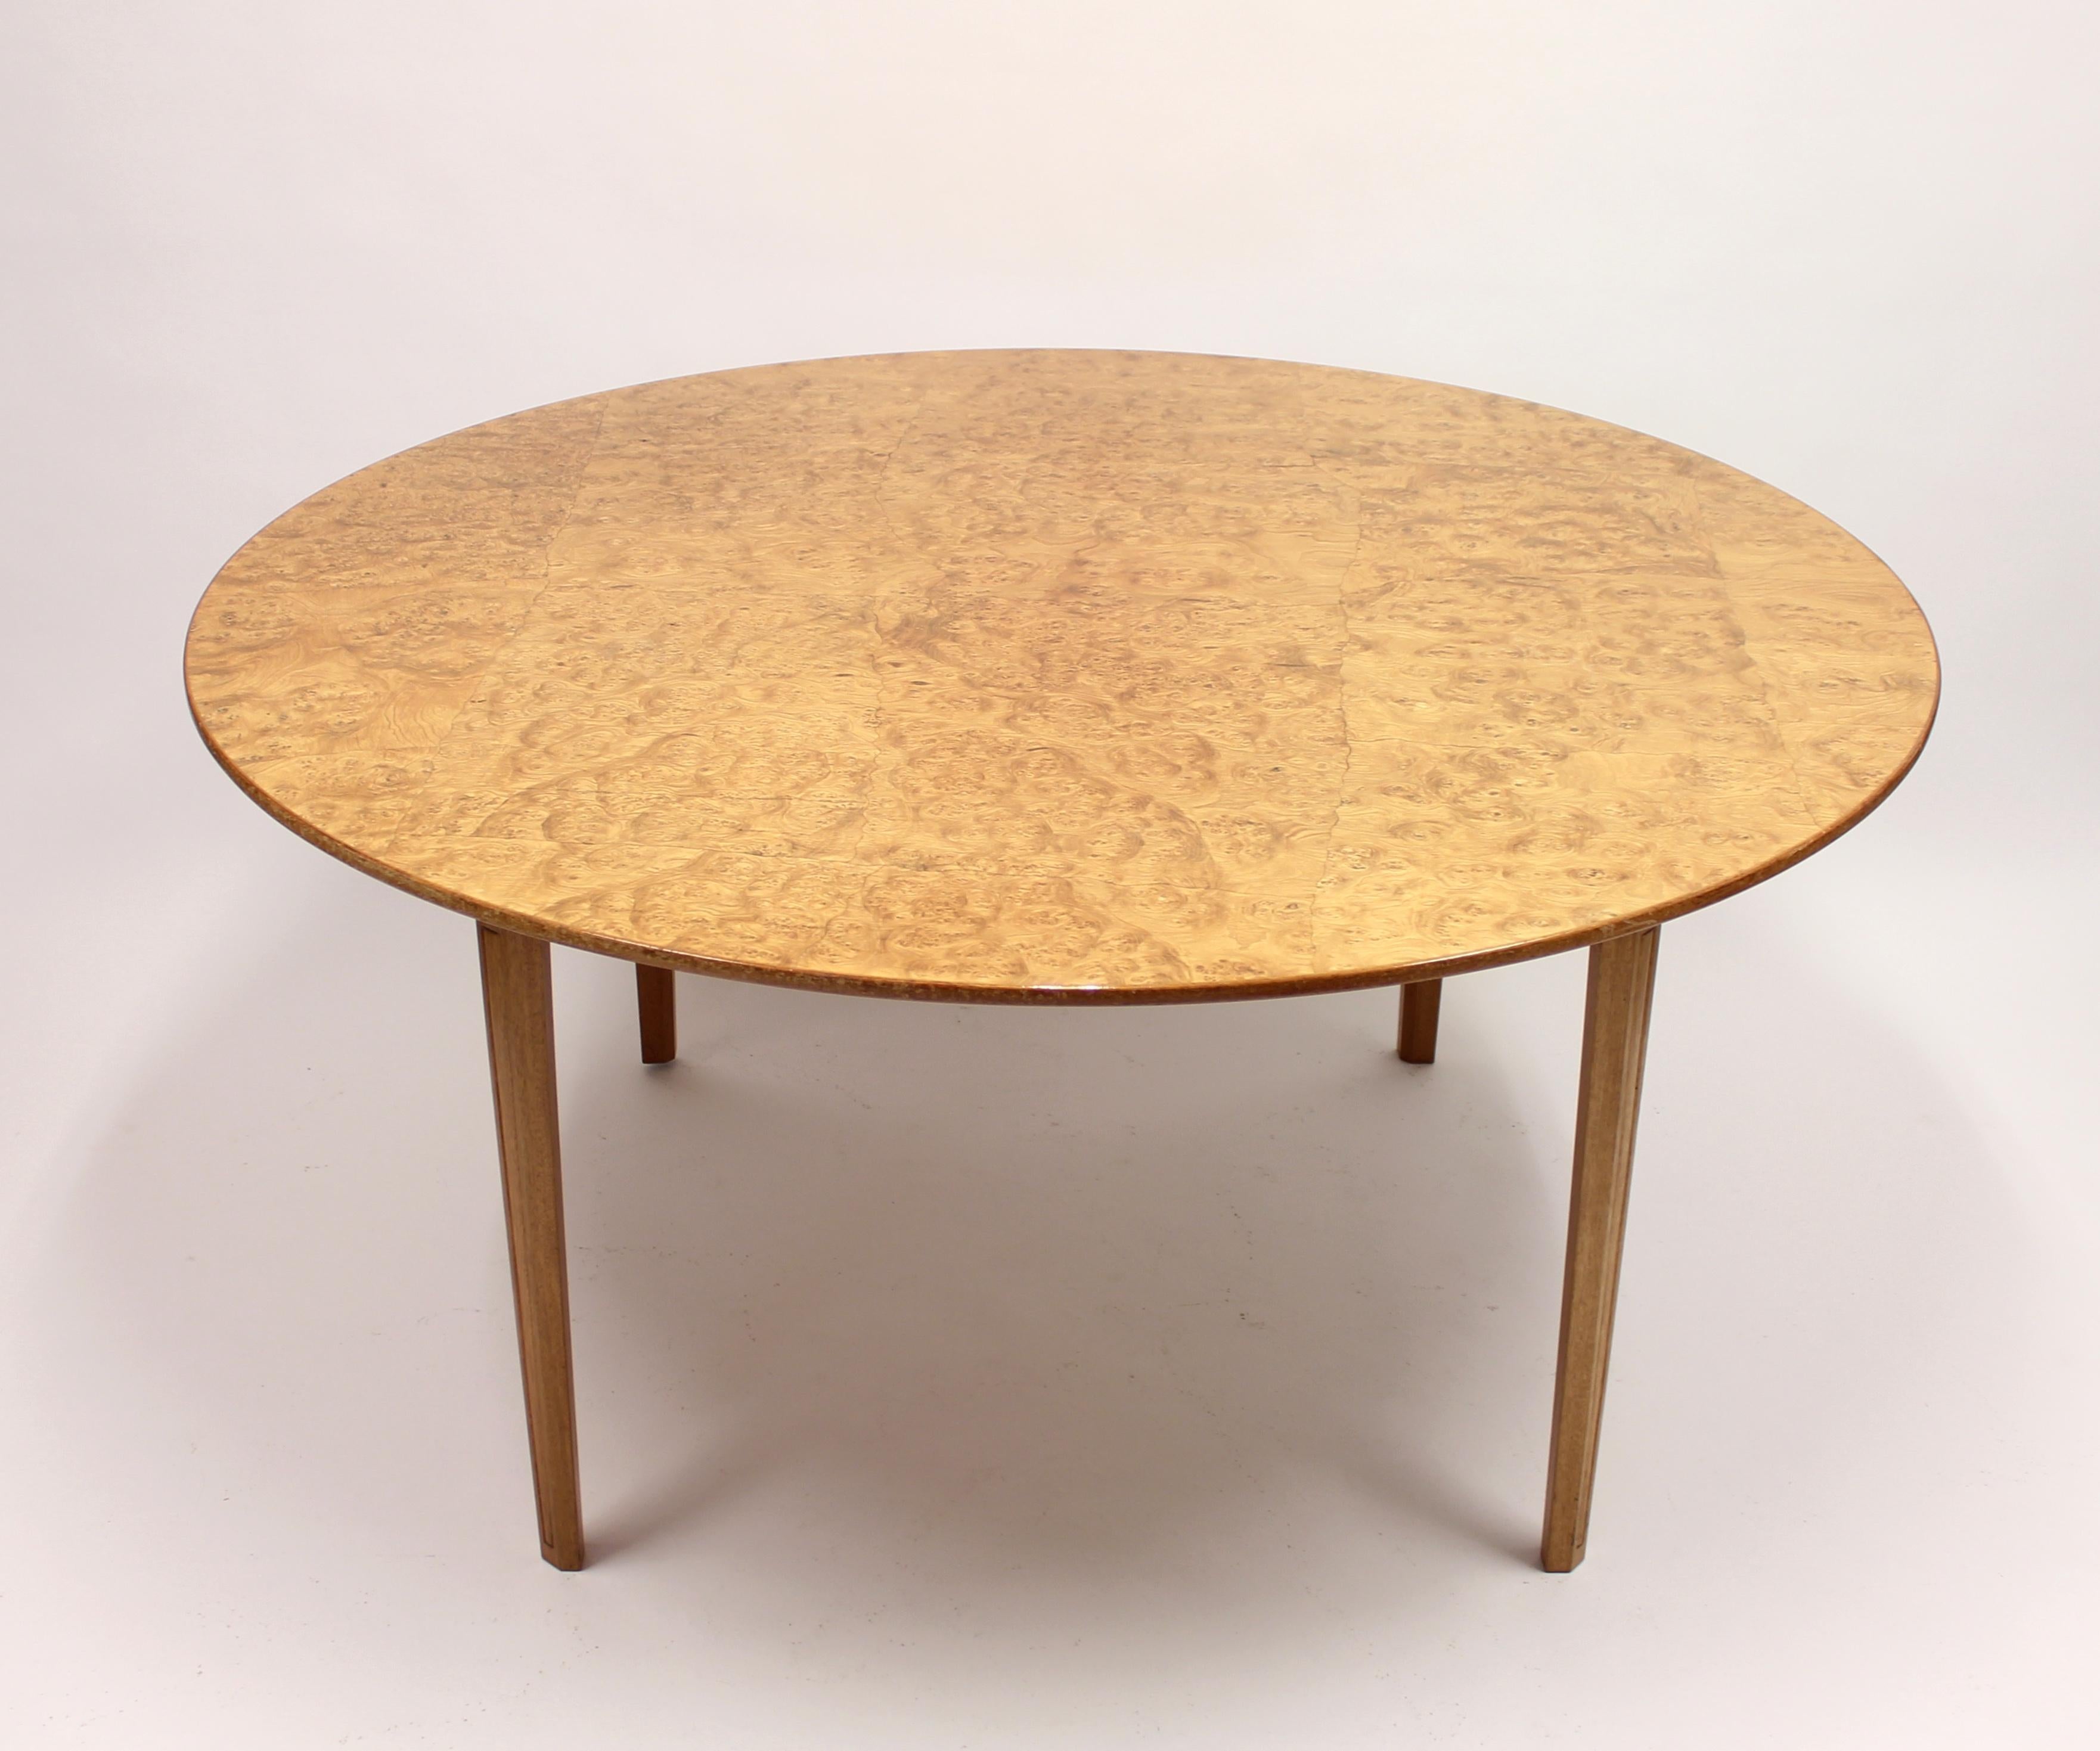 Unique one-of-a-kind high quality hand-crafted dining-/games table executed by unidentified master cabinetmaker, most likely a special order, Swedish, circa 1970s. Removable tabletop, held in place by four chocks, with alder root (or possibly birch